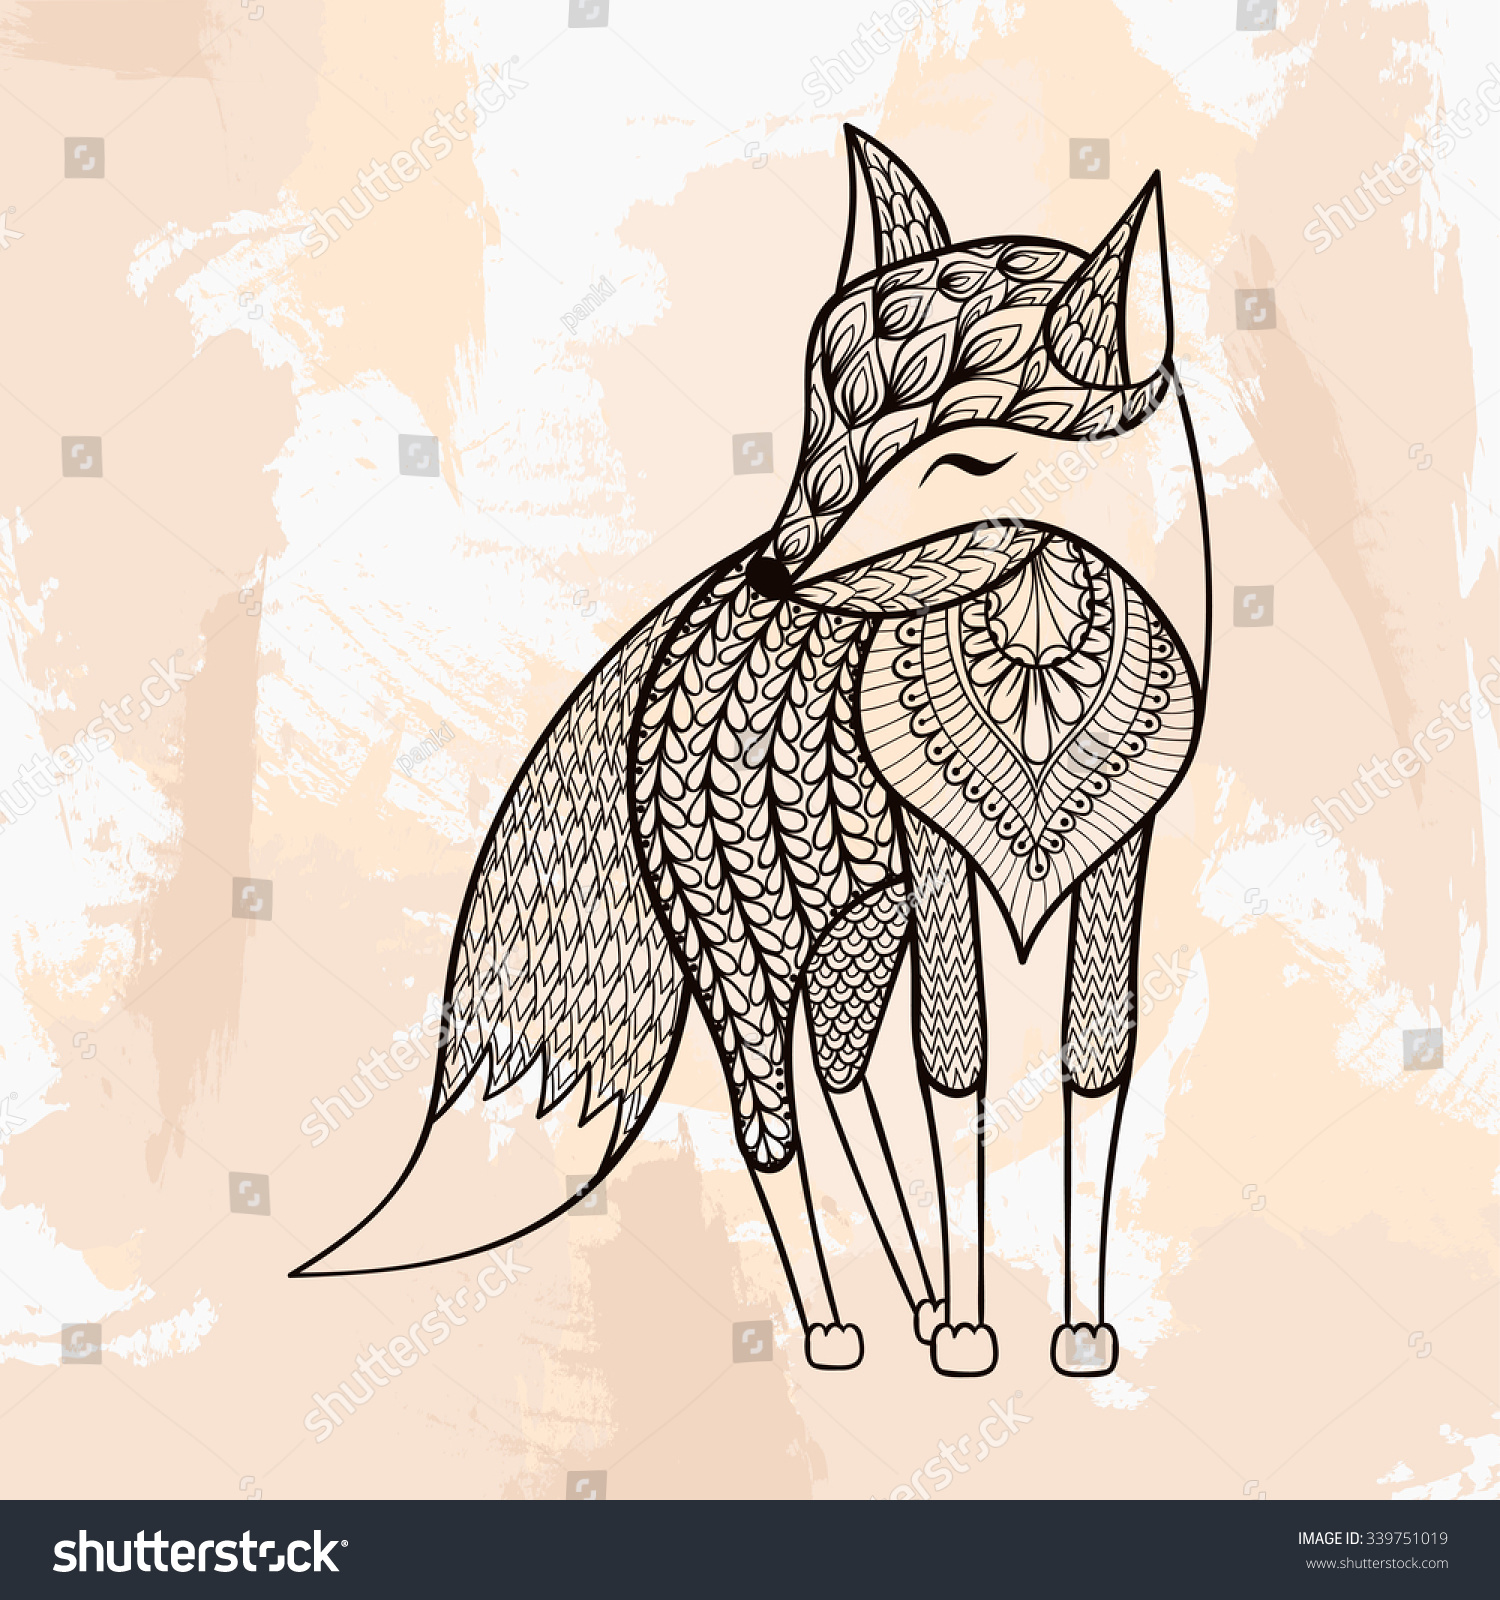 SVG of Zentangle vector Fox, tattoo in hipster style. Ornamental tribal patterned illustration for adult anti stress coloring pages. Hand drawn black sketch isolated on grunge background. Animal collection. svg